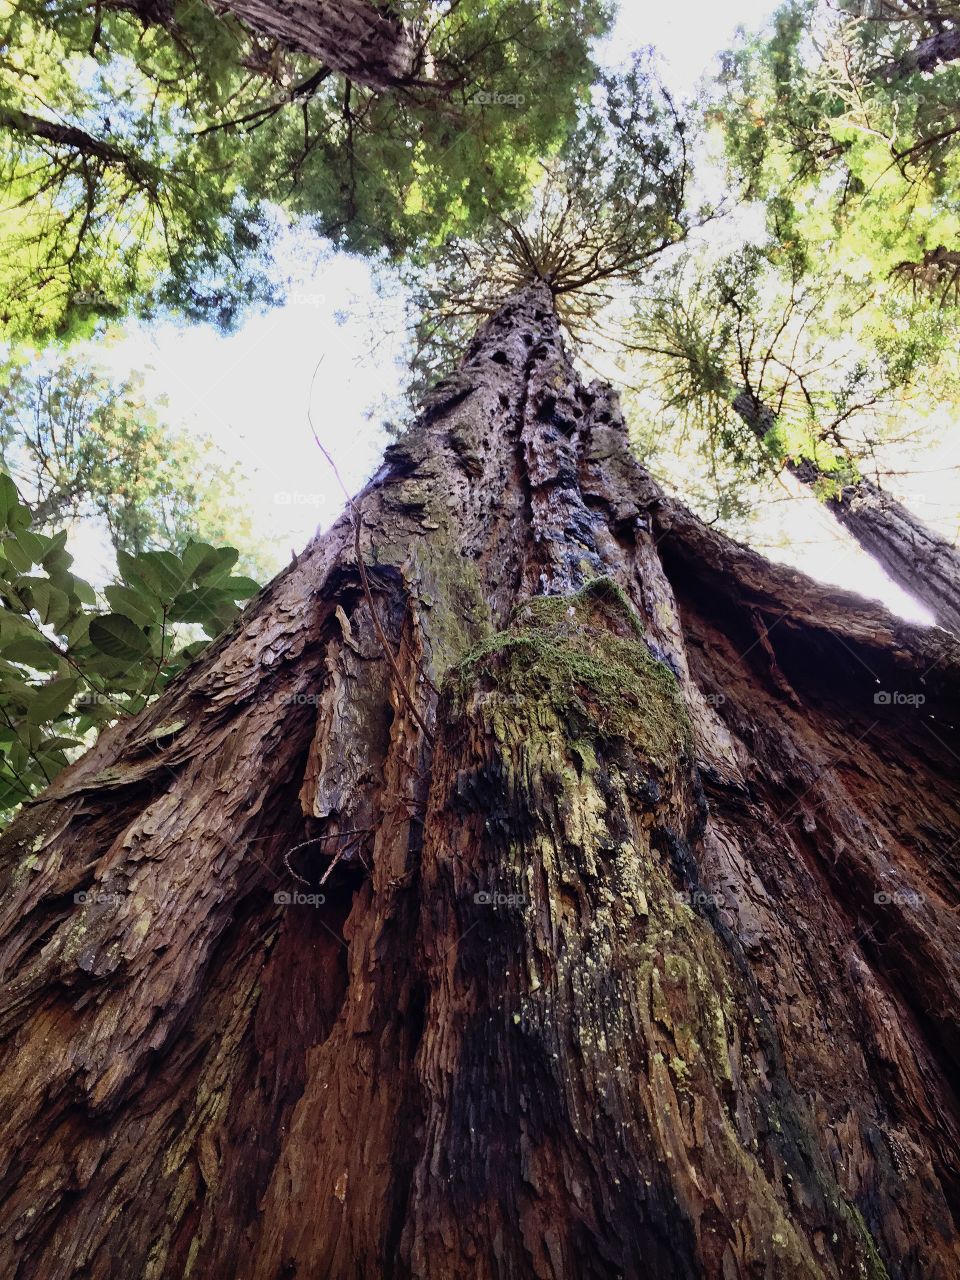 Majestic Redwoods . Looking up a Redwood tree in Muir Woods. 